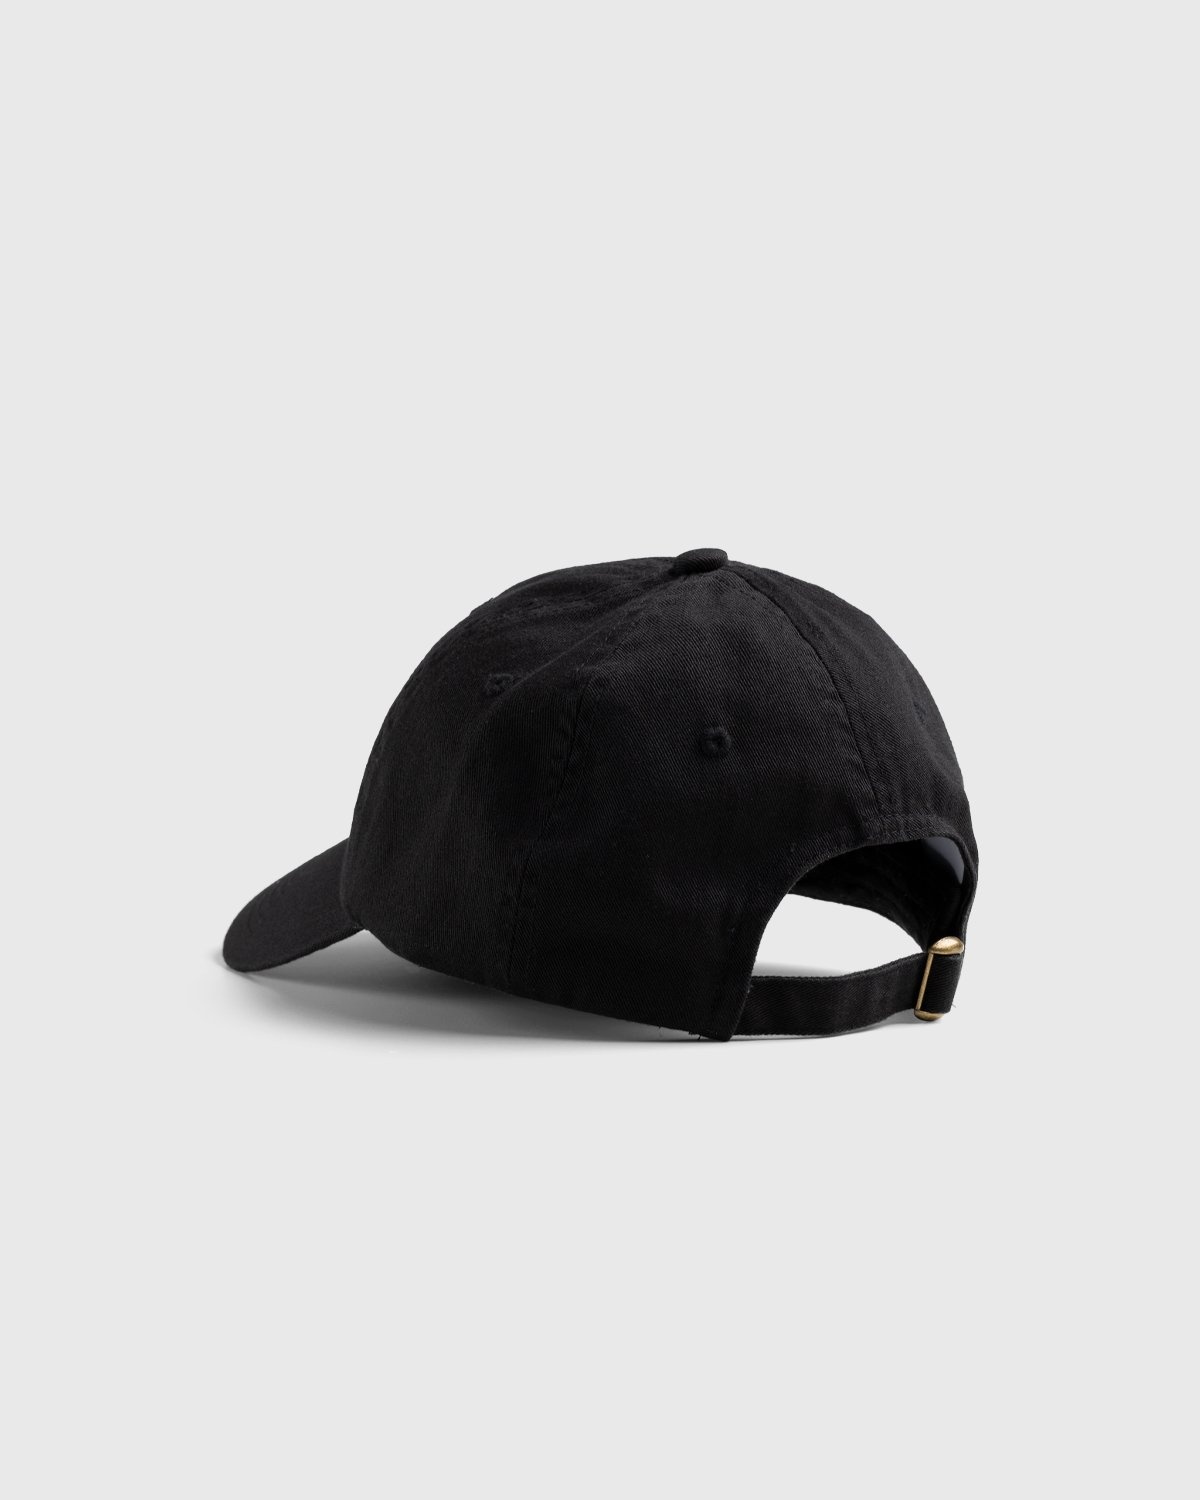 HO HO COCO – Out of Office Cap Black | Highsnobiety Shop